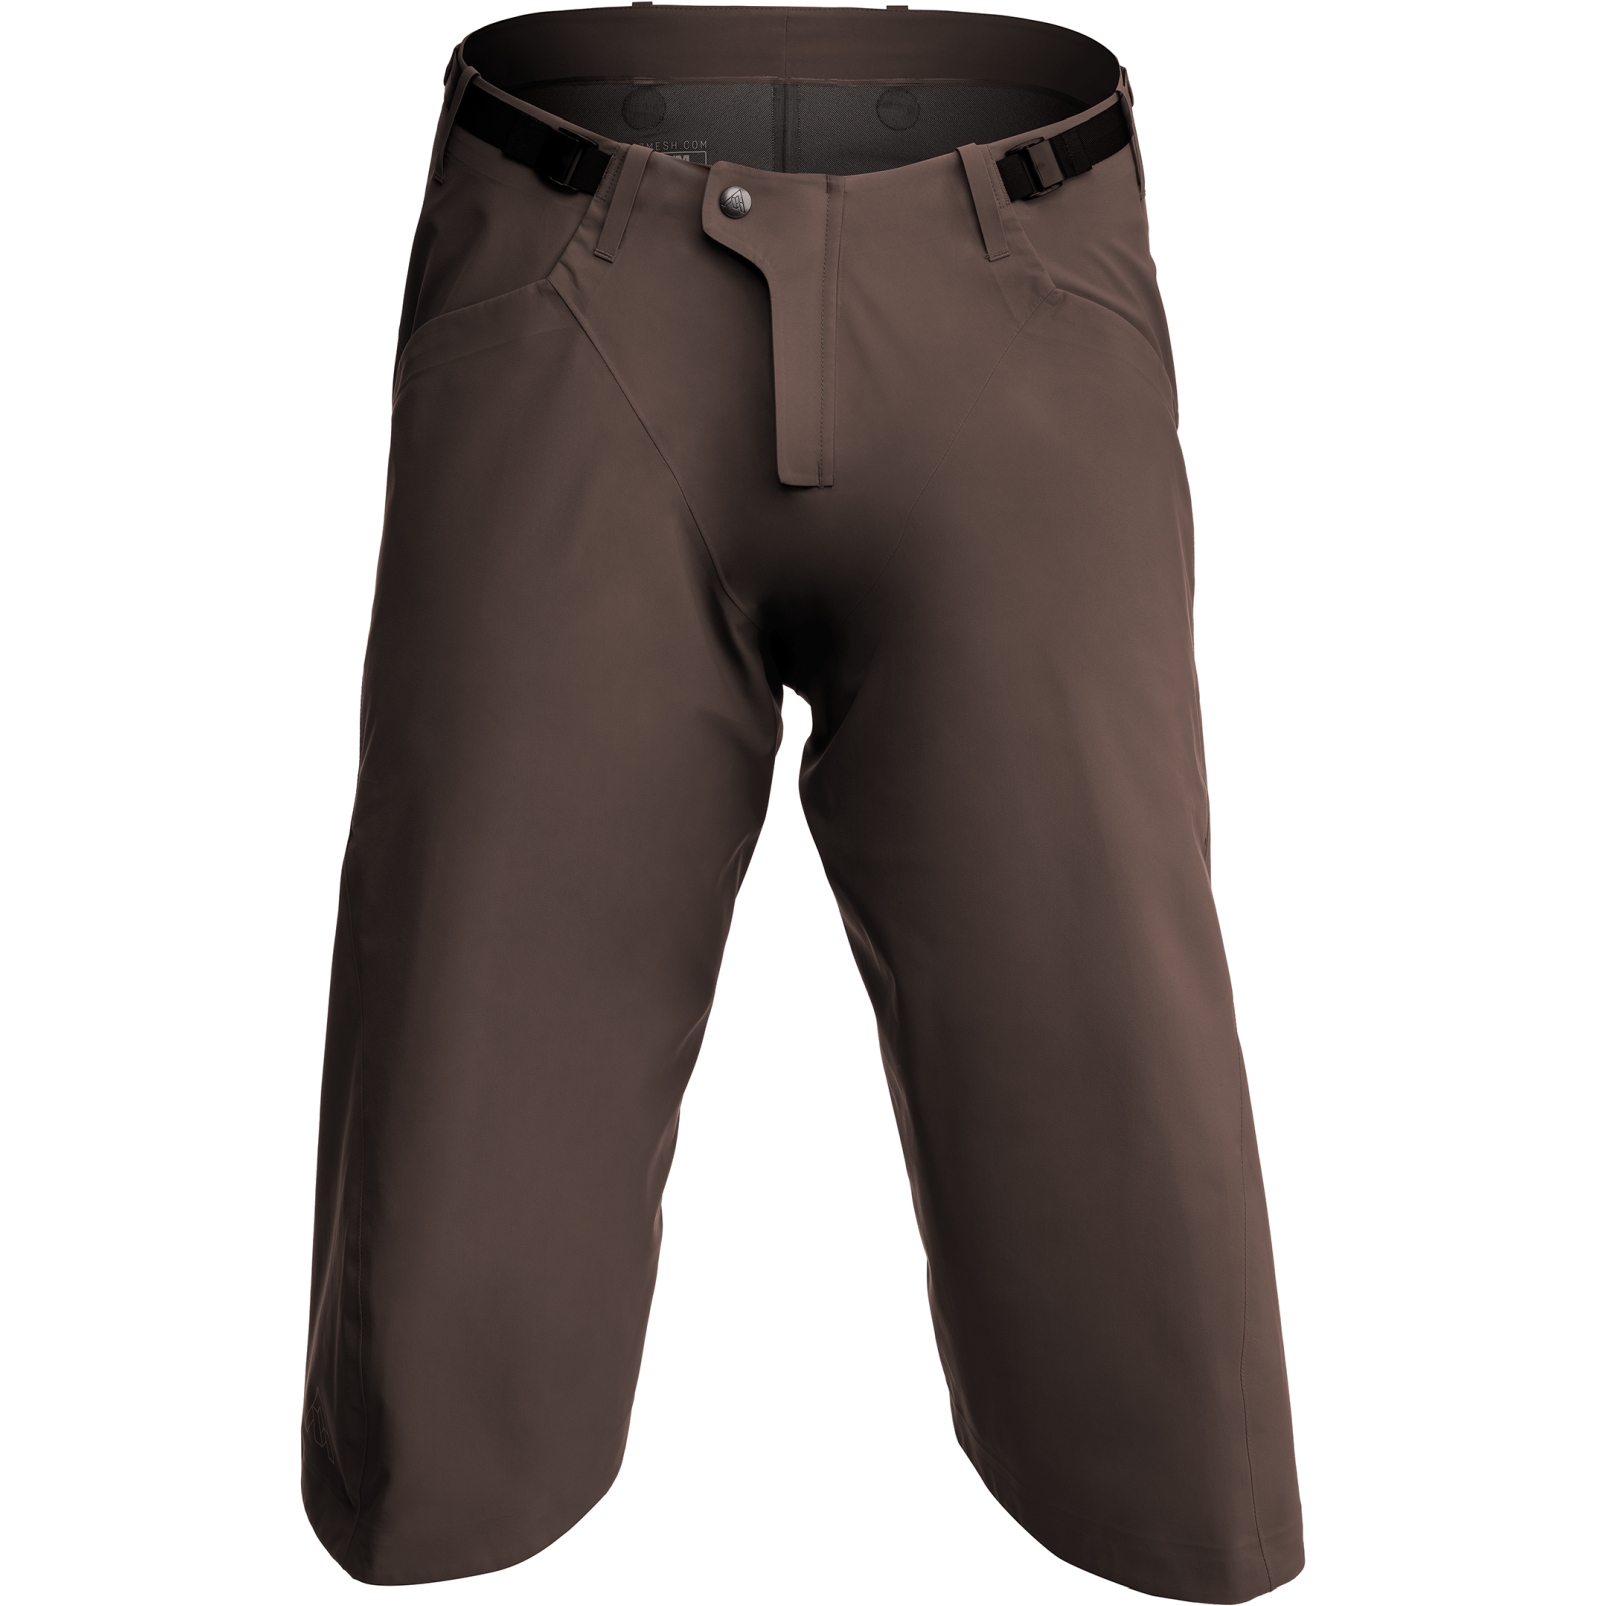 Picture of 7mesh Revo Shorts - Peat